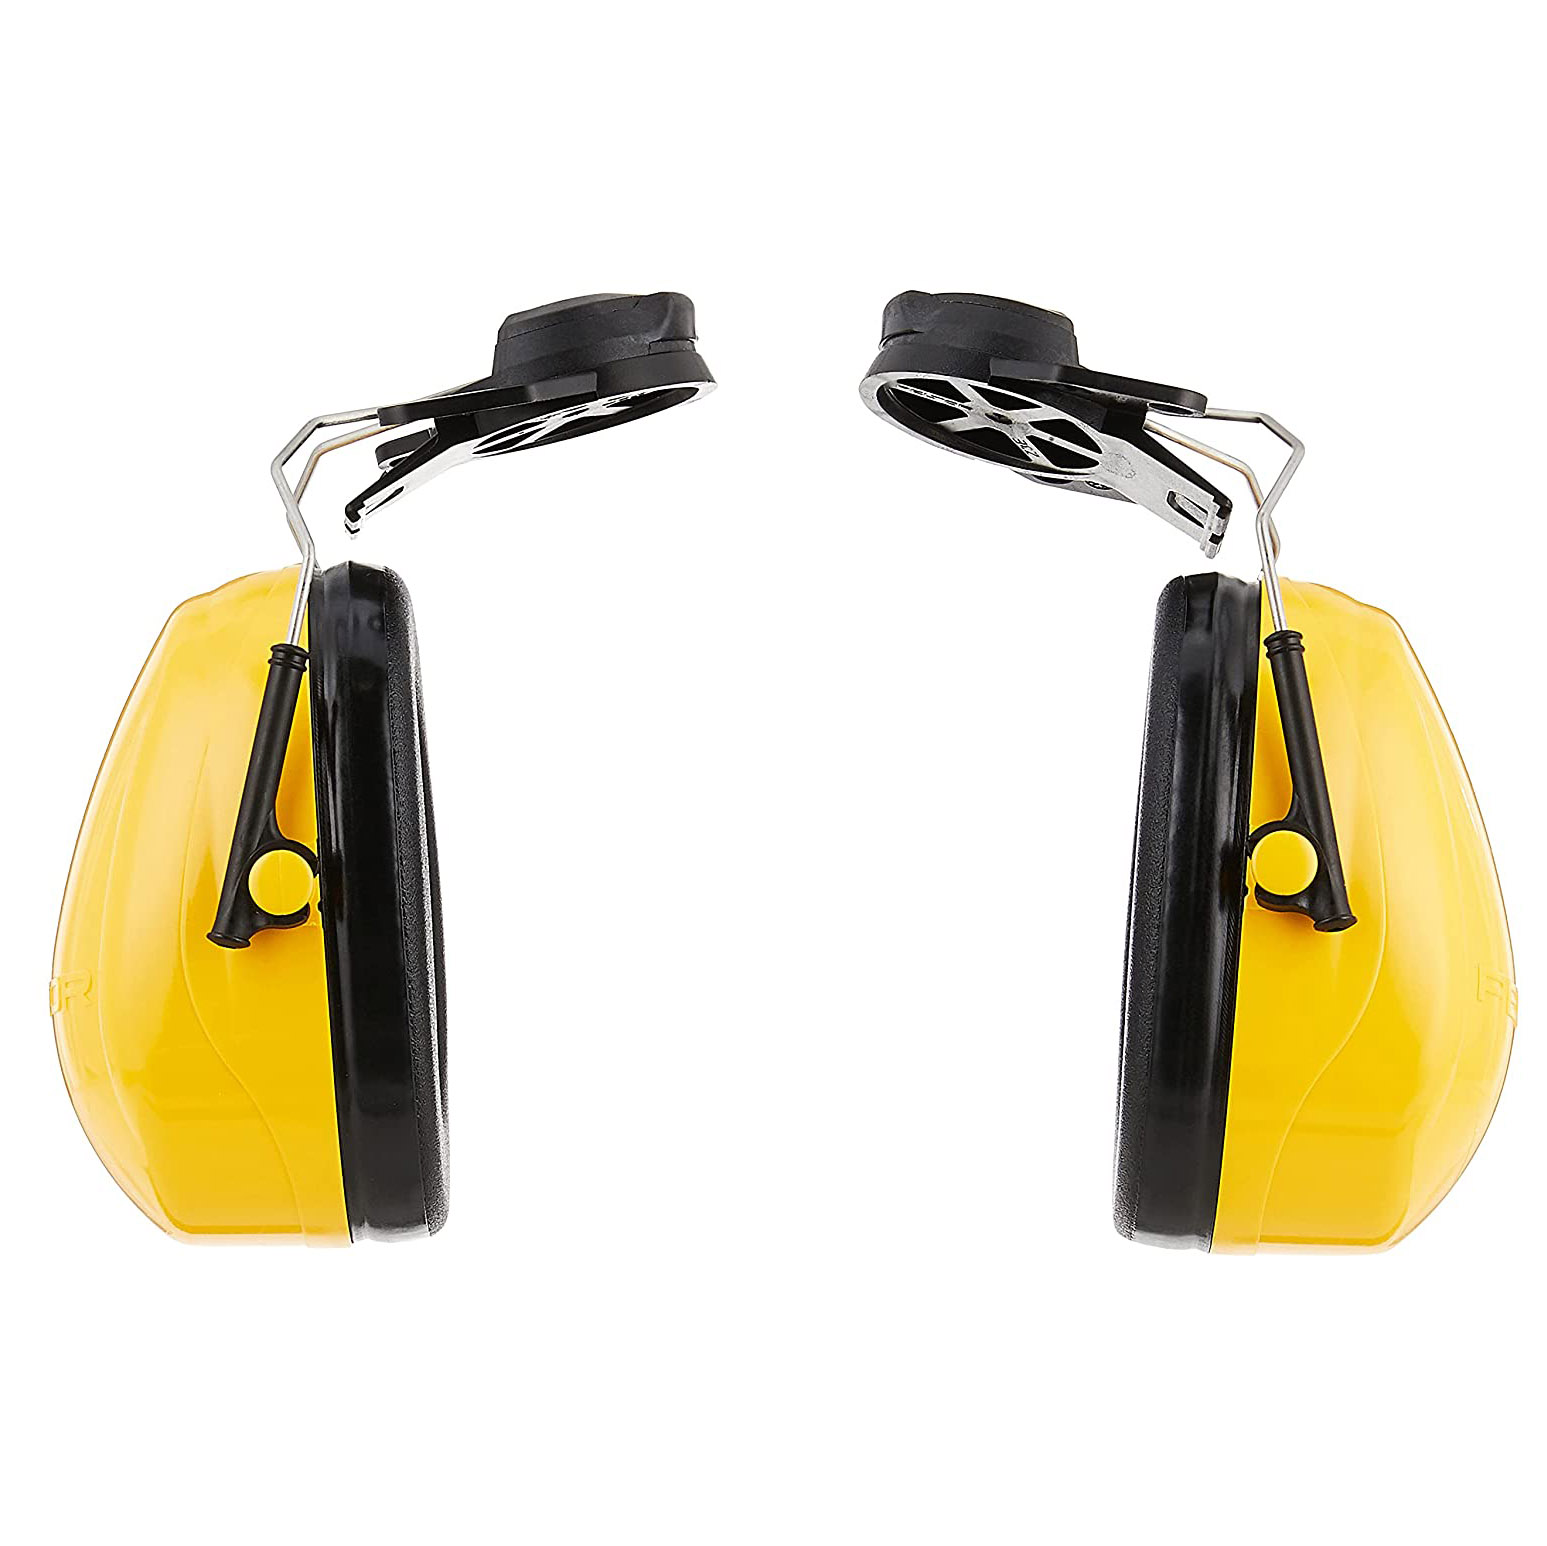 Buy 3M Earmuffs Hard Hat Attached - 3Mh9P3E Online | Safety | Qetaat.com